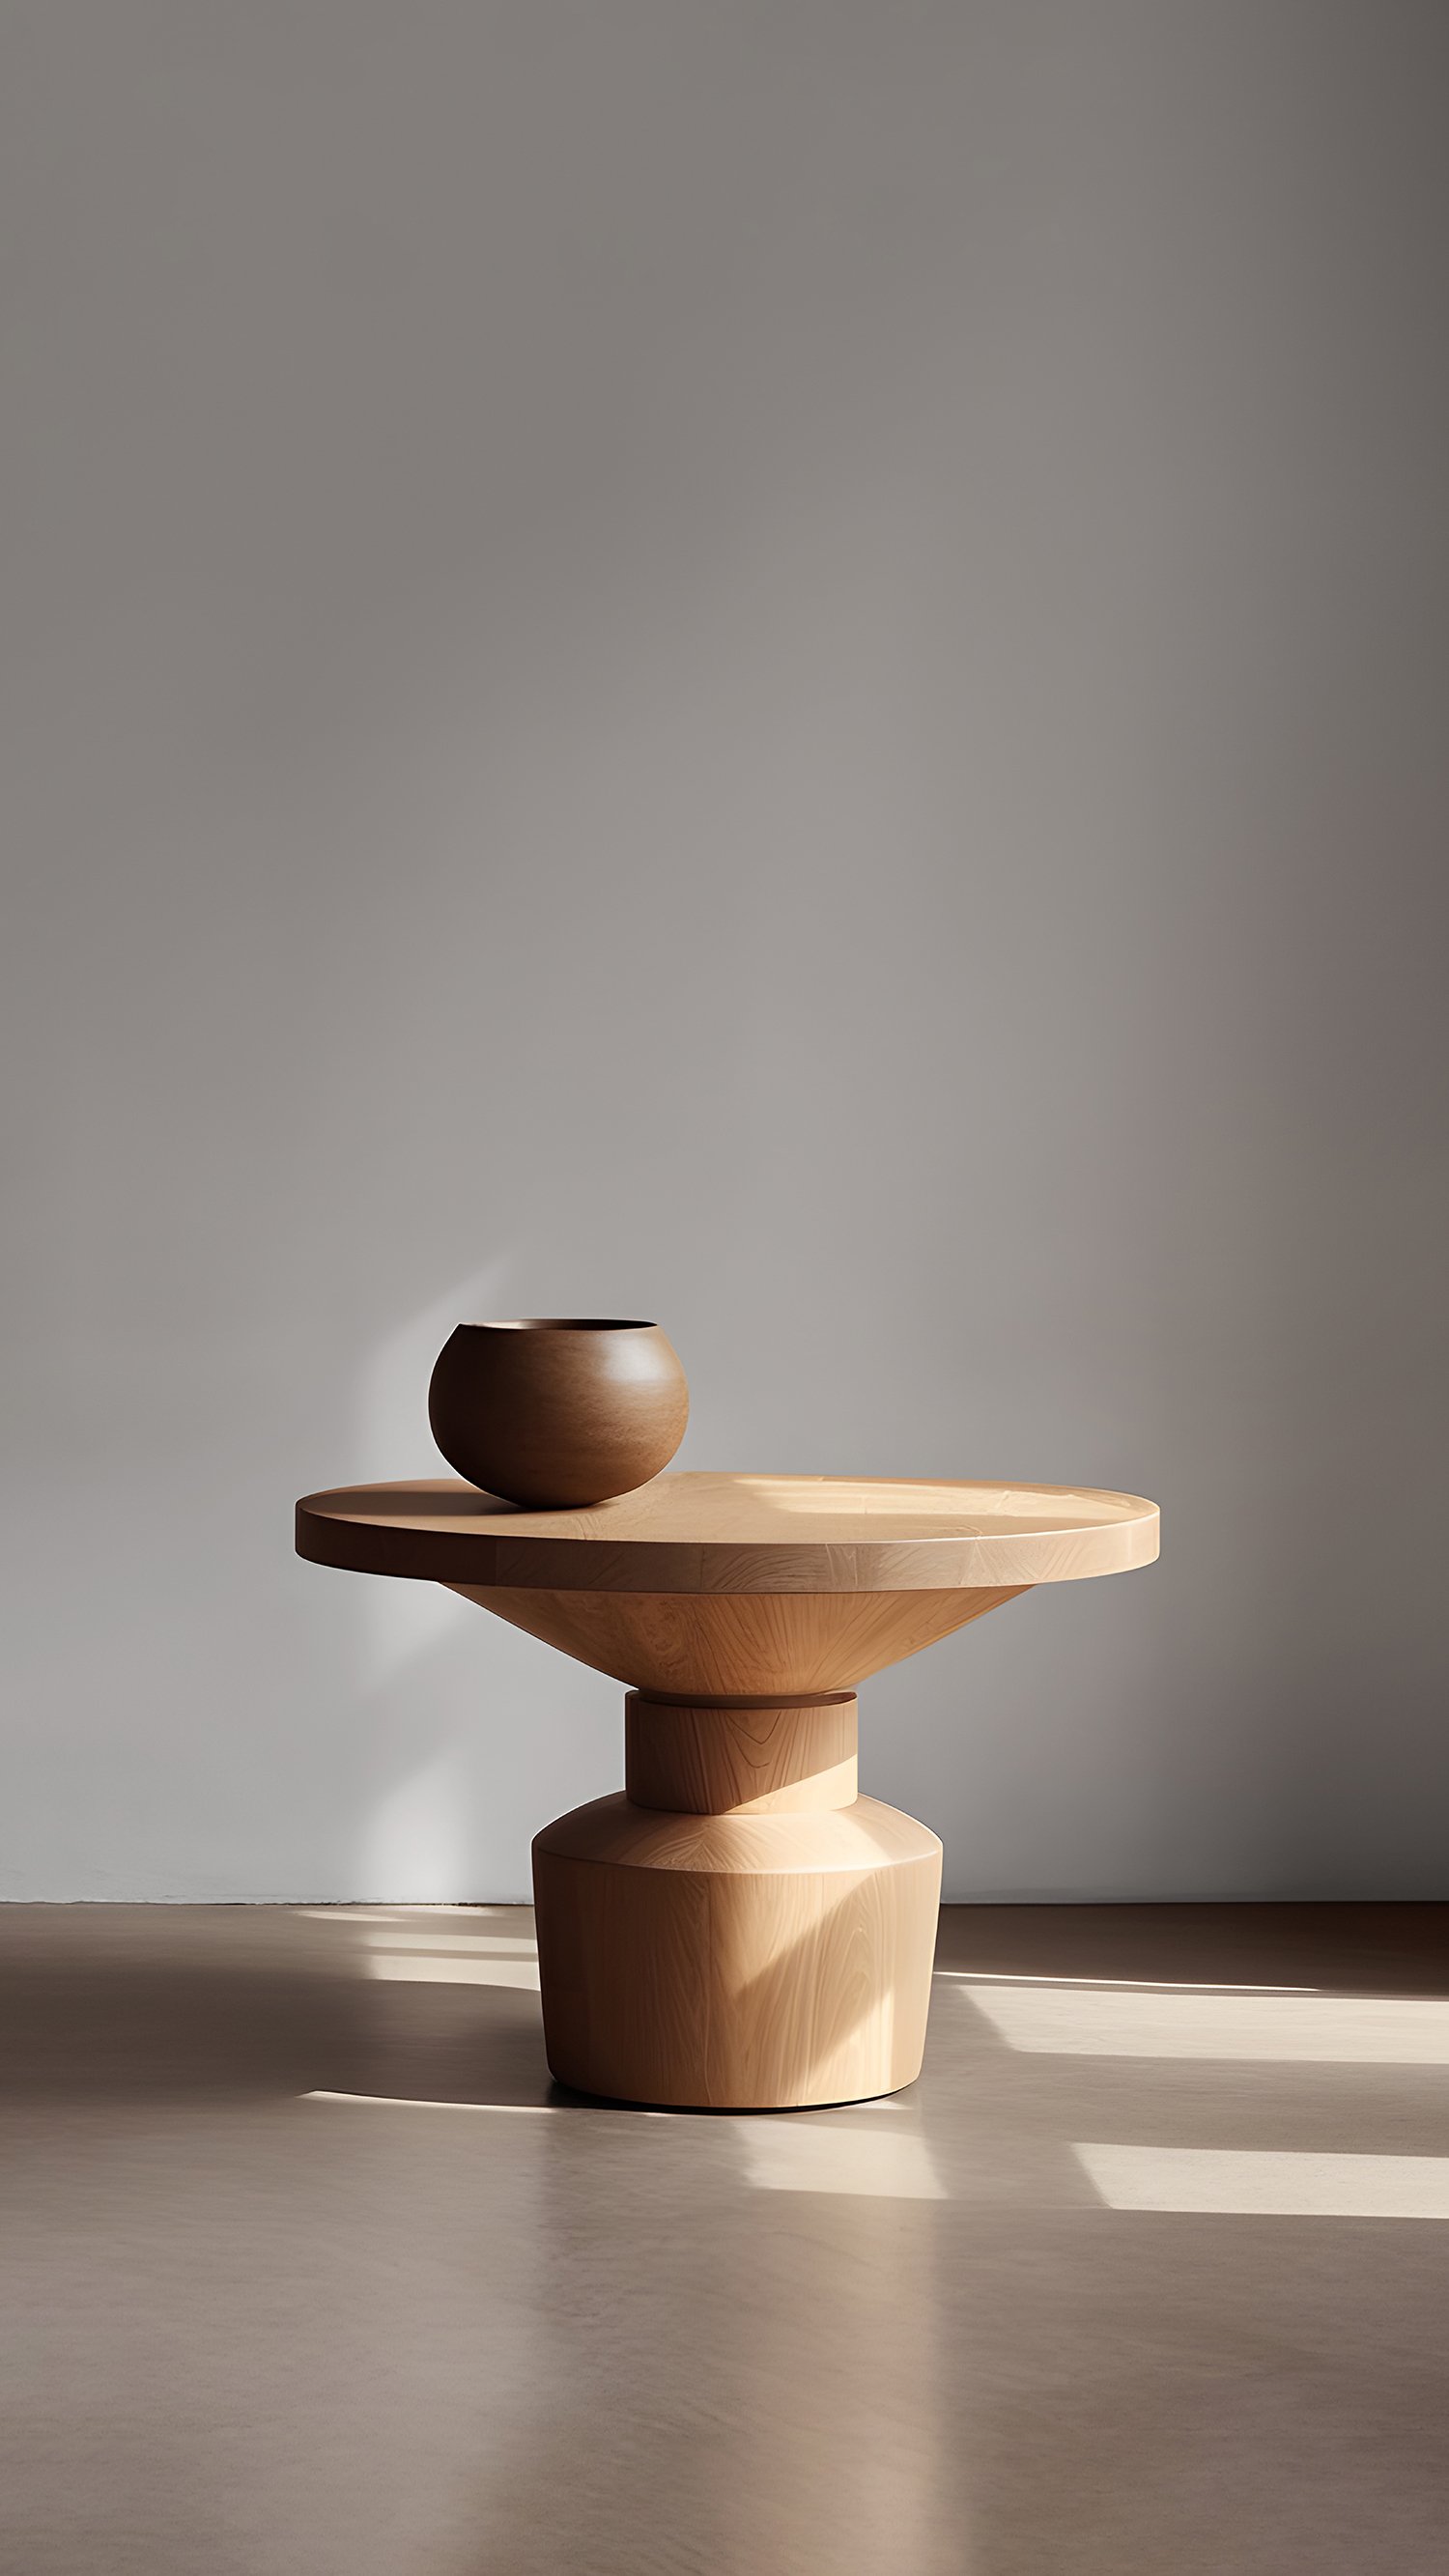 Socle 33 Side Table by Joel Escalona for NONO - 5.jpg